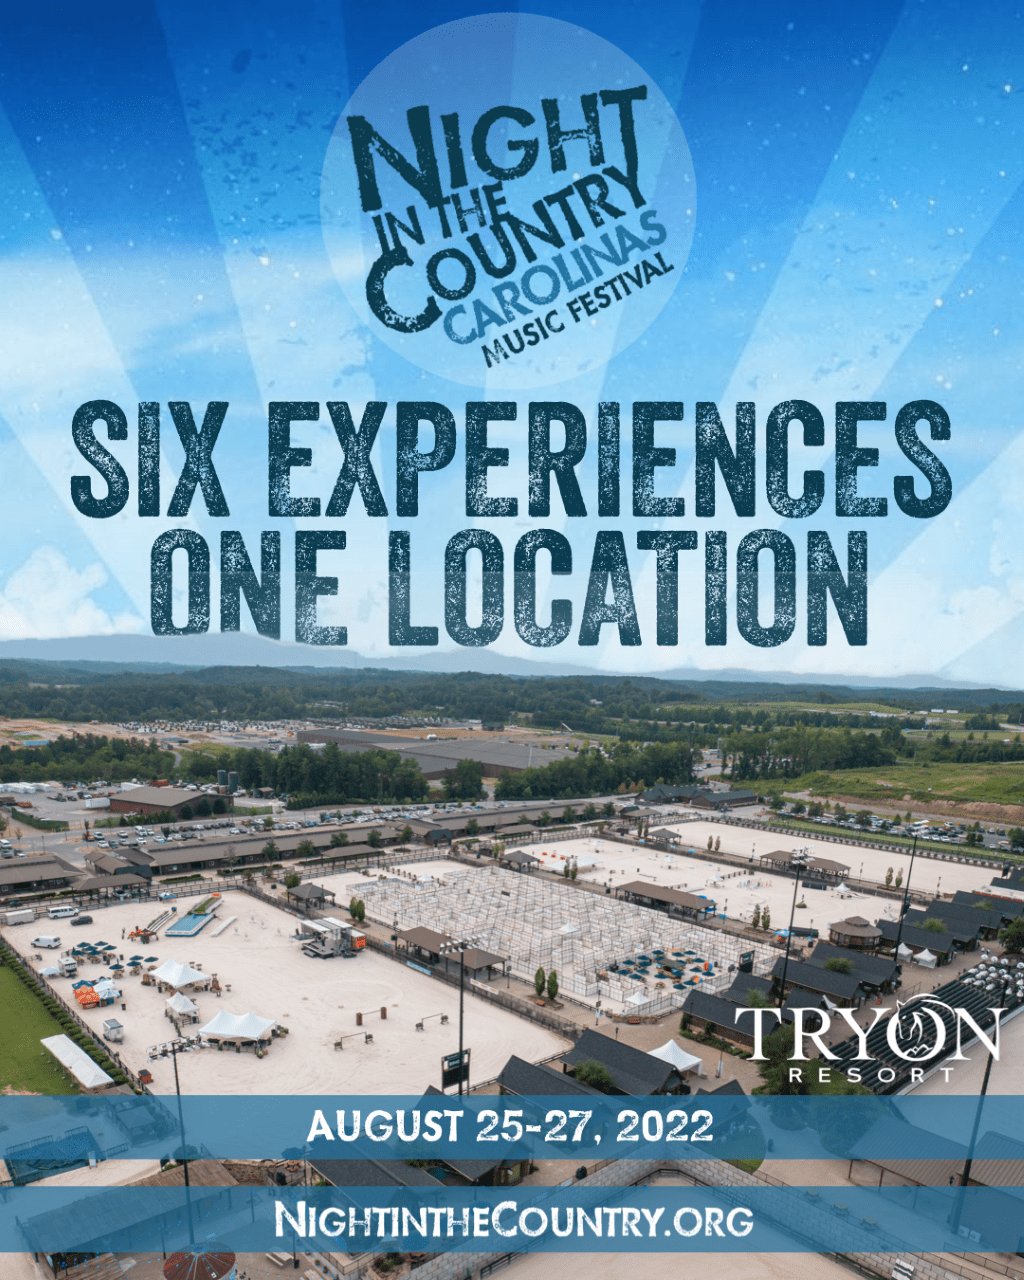 WE’RE CREATING THE ULTIMATE PARTY SPOT Night in the Country Carolinas